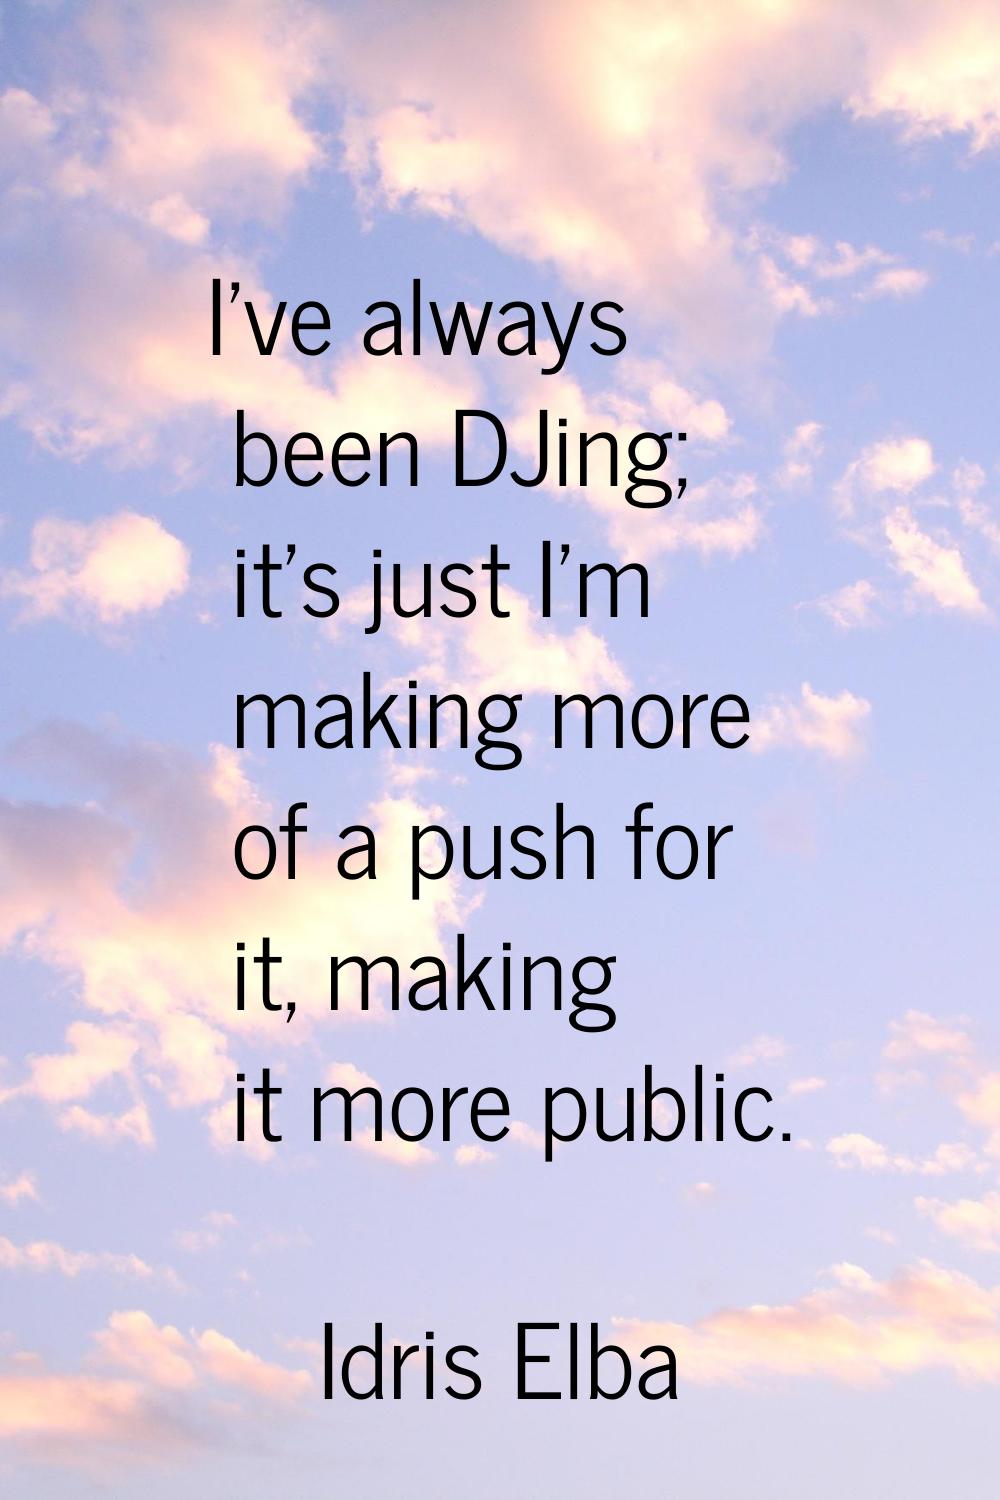 I've always been DJing; it's just I'm making more of a push for it, making it more public.